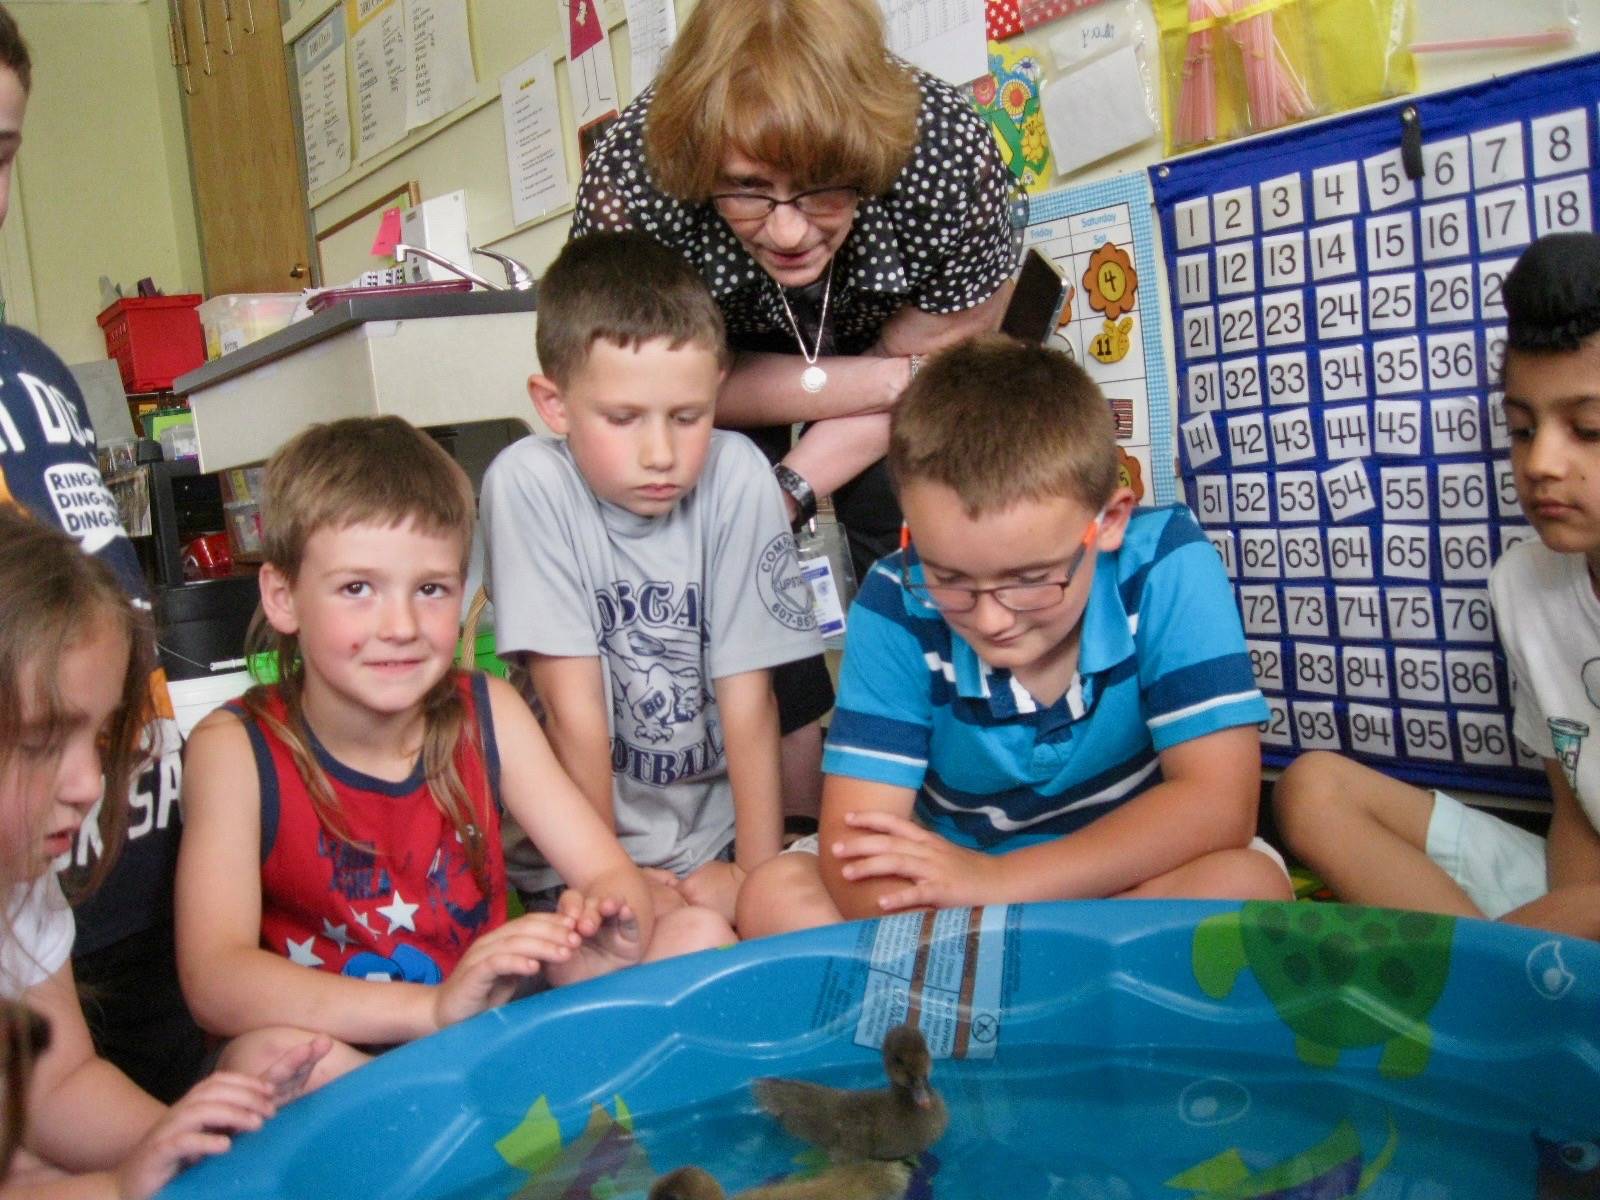 4 Students and a teacher watch ducks swim in a pool.